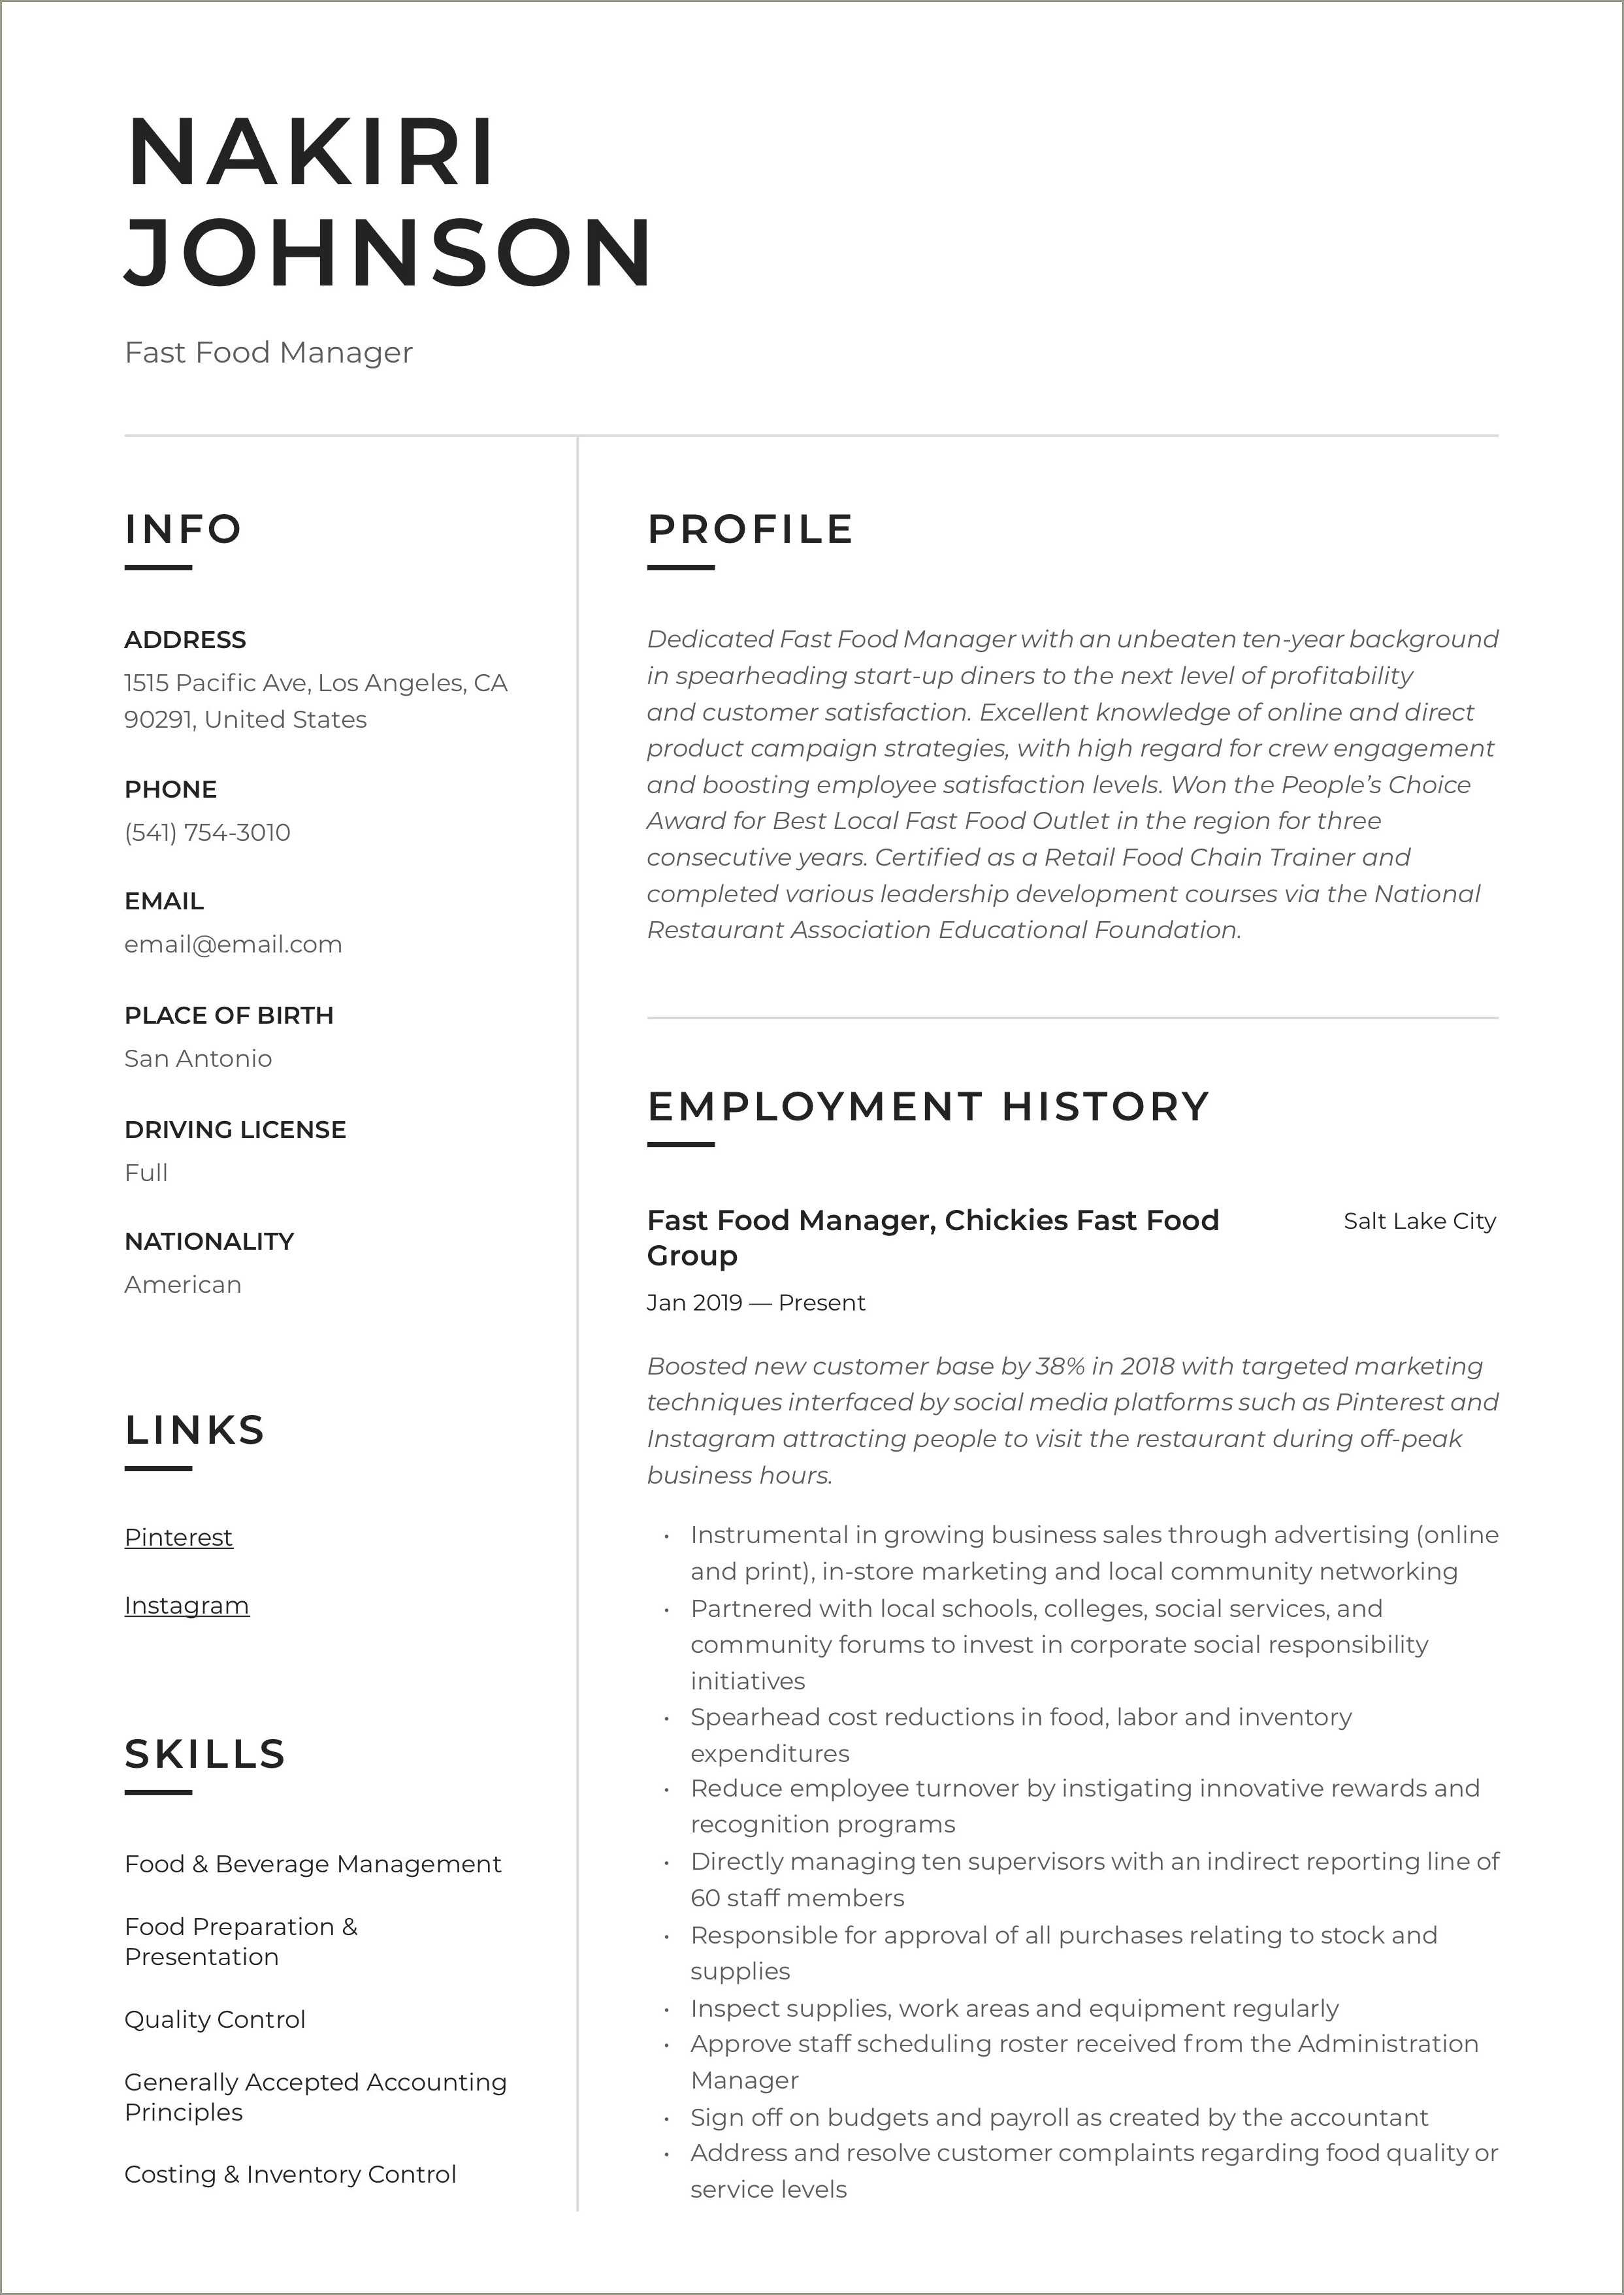 Fast Food Manager Resume Summary